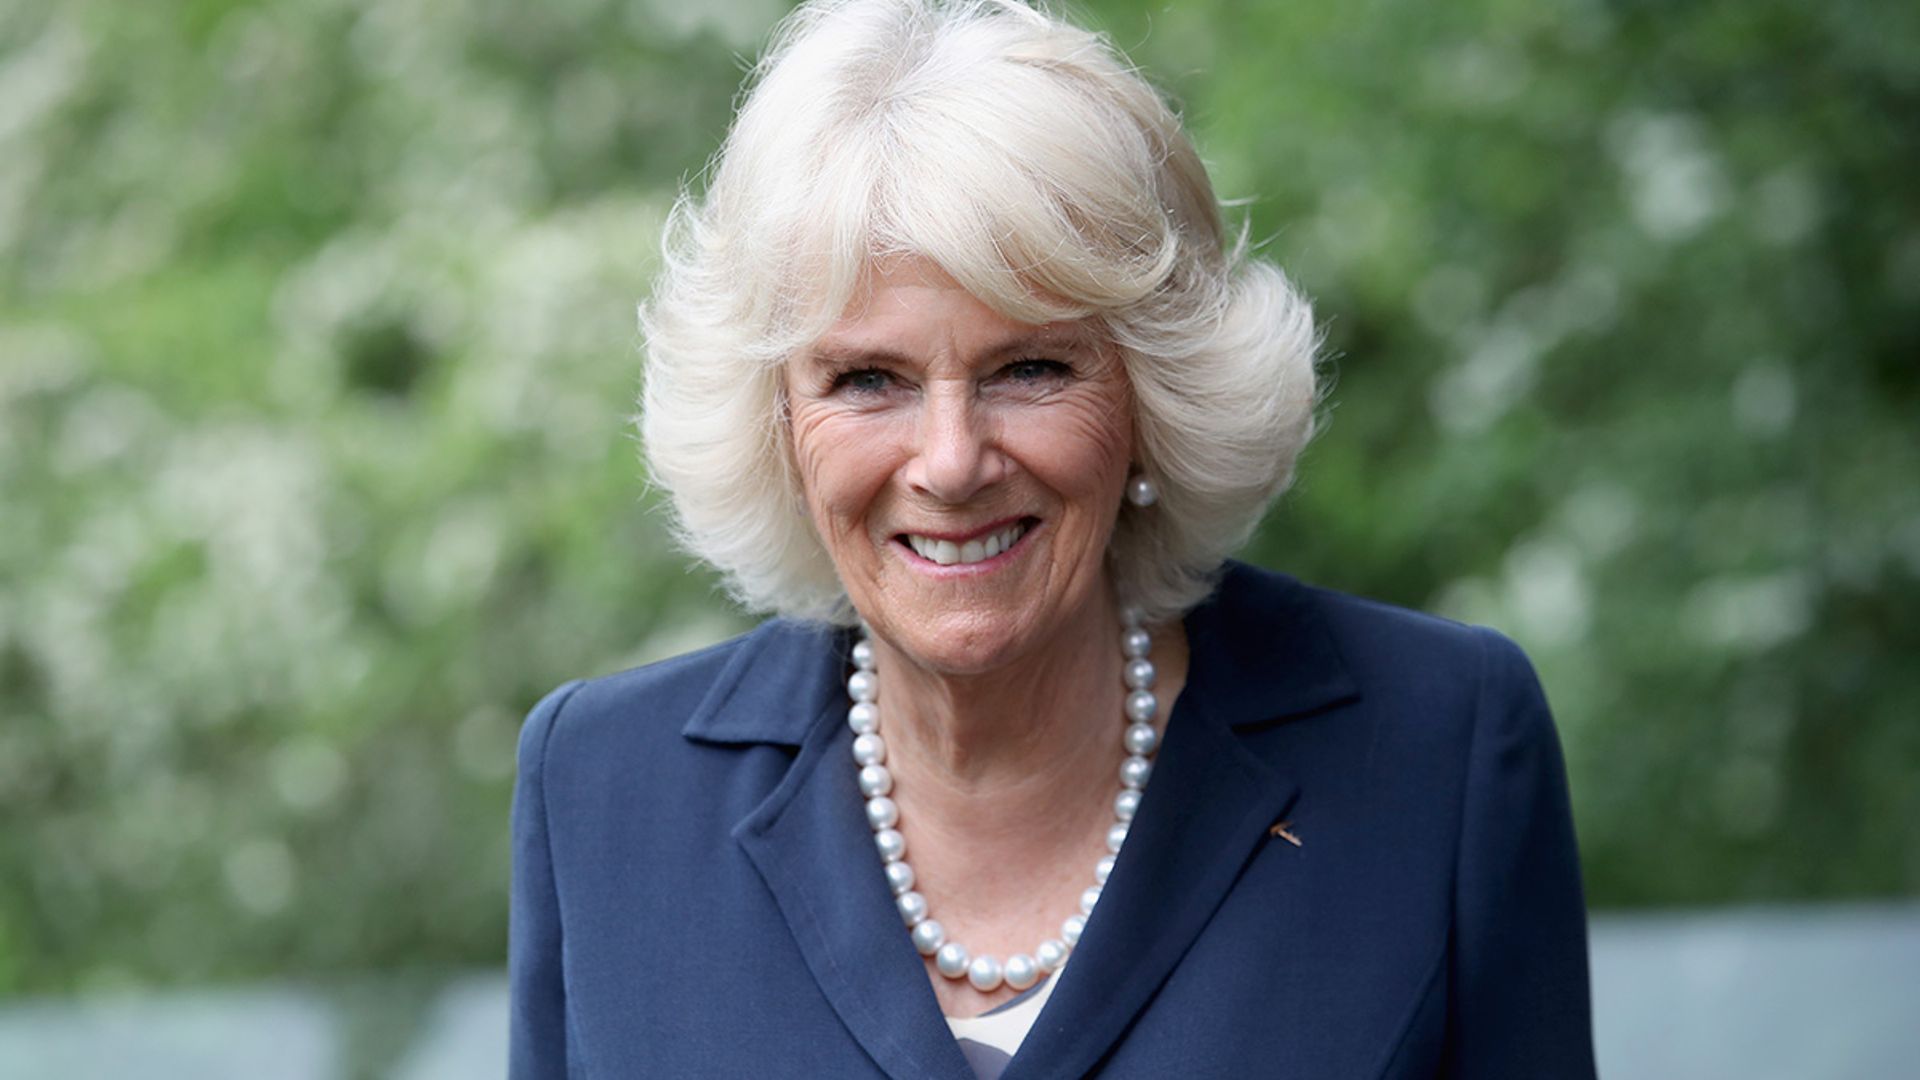 Duchess of Cornwall signs up to popular app Houseparty as she continues to self-isolate